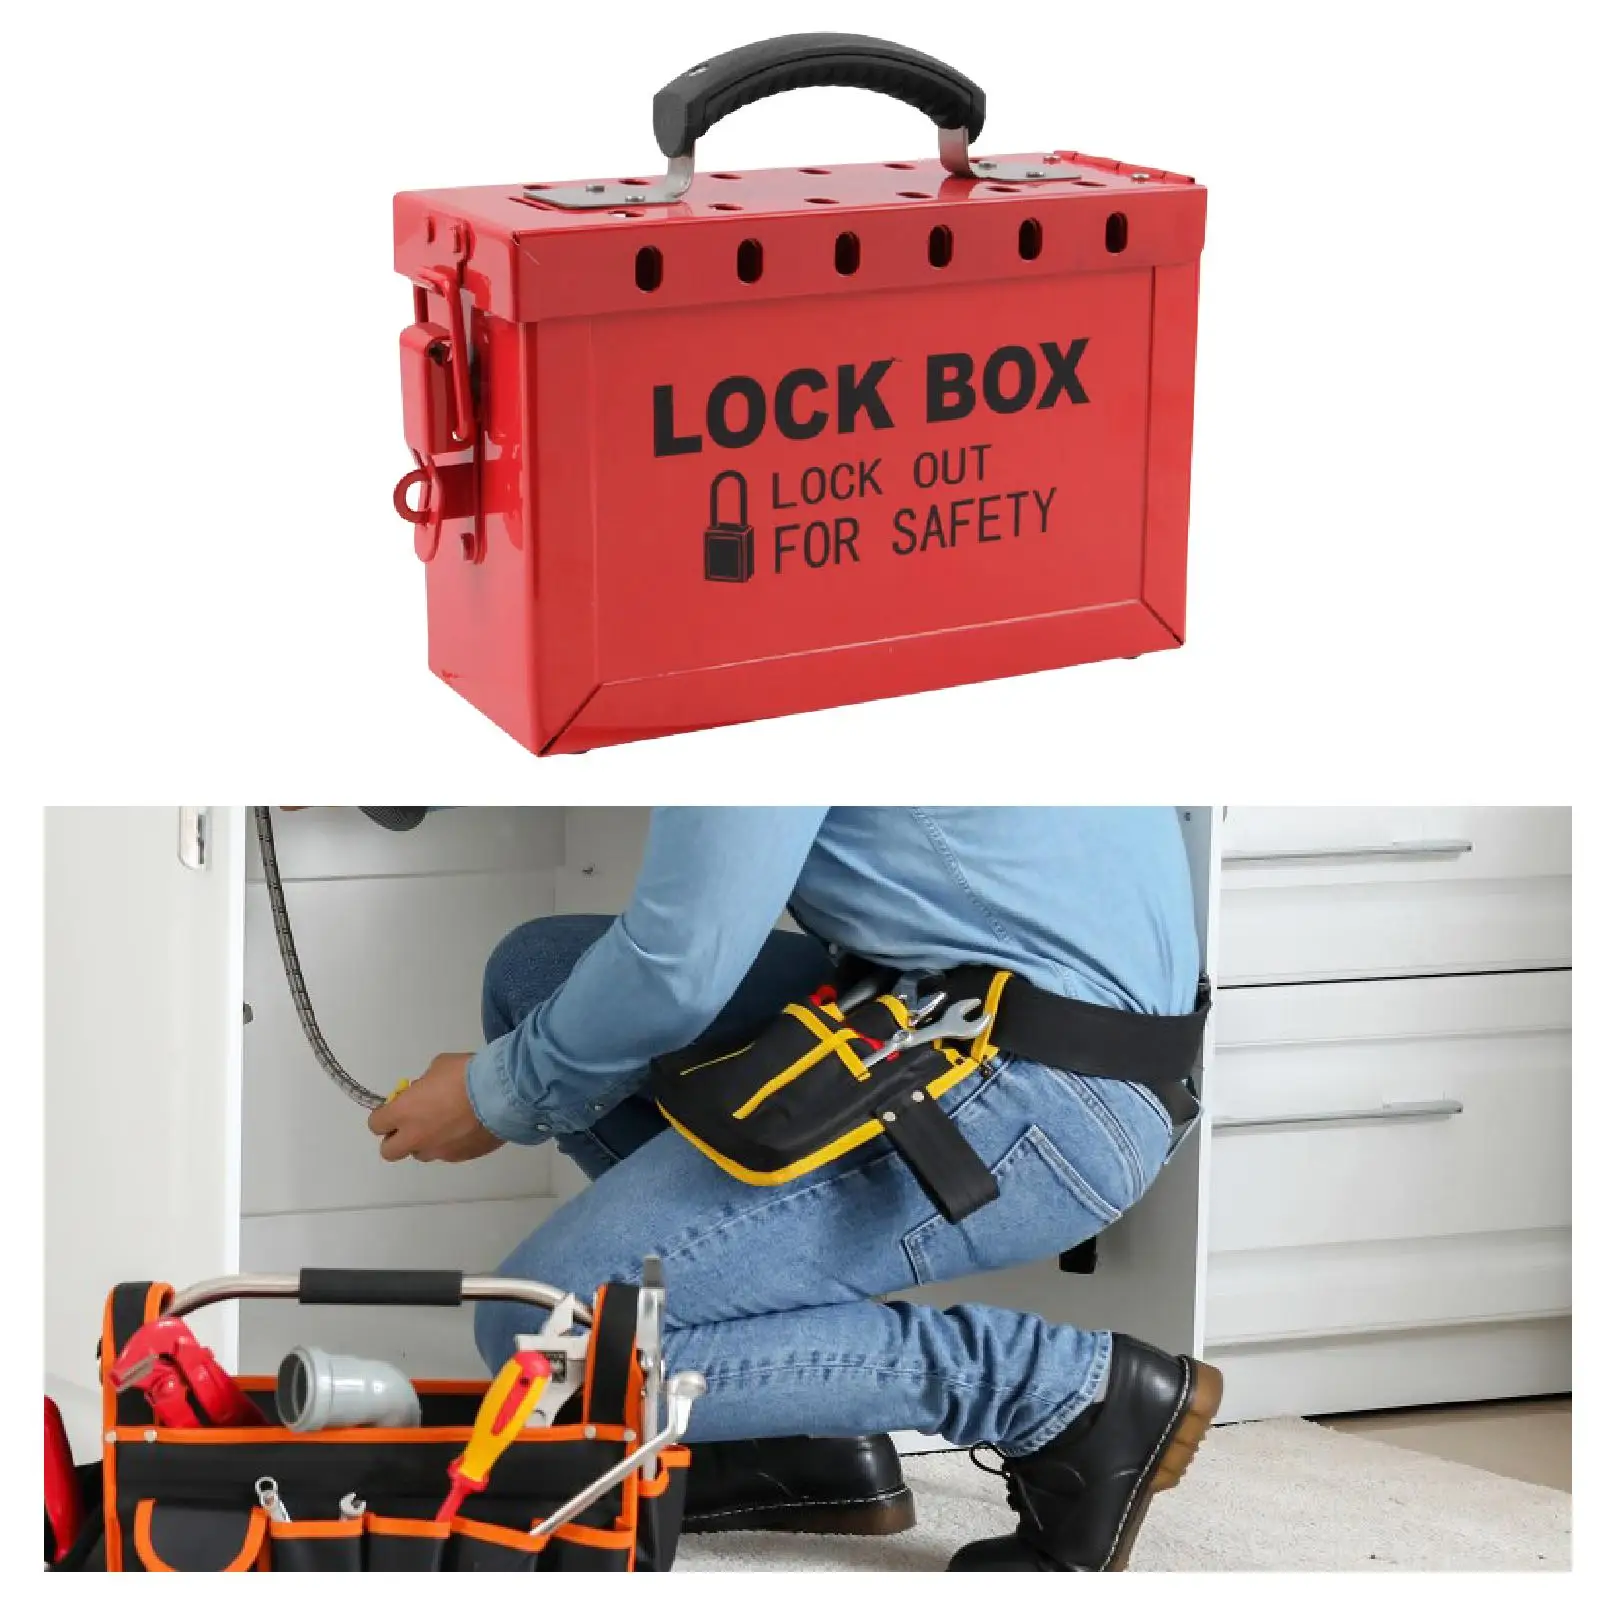 Lock Box 13 Users Anti Slip Handle Lightweight Convenient Efficiency Easy to Use Padlock Box for Car Factory Device Management